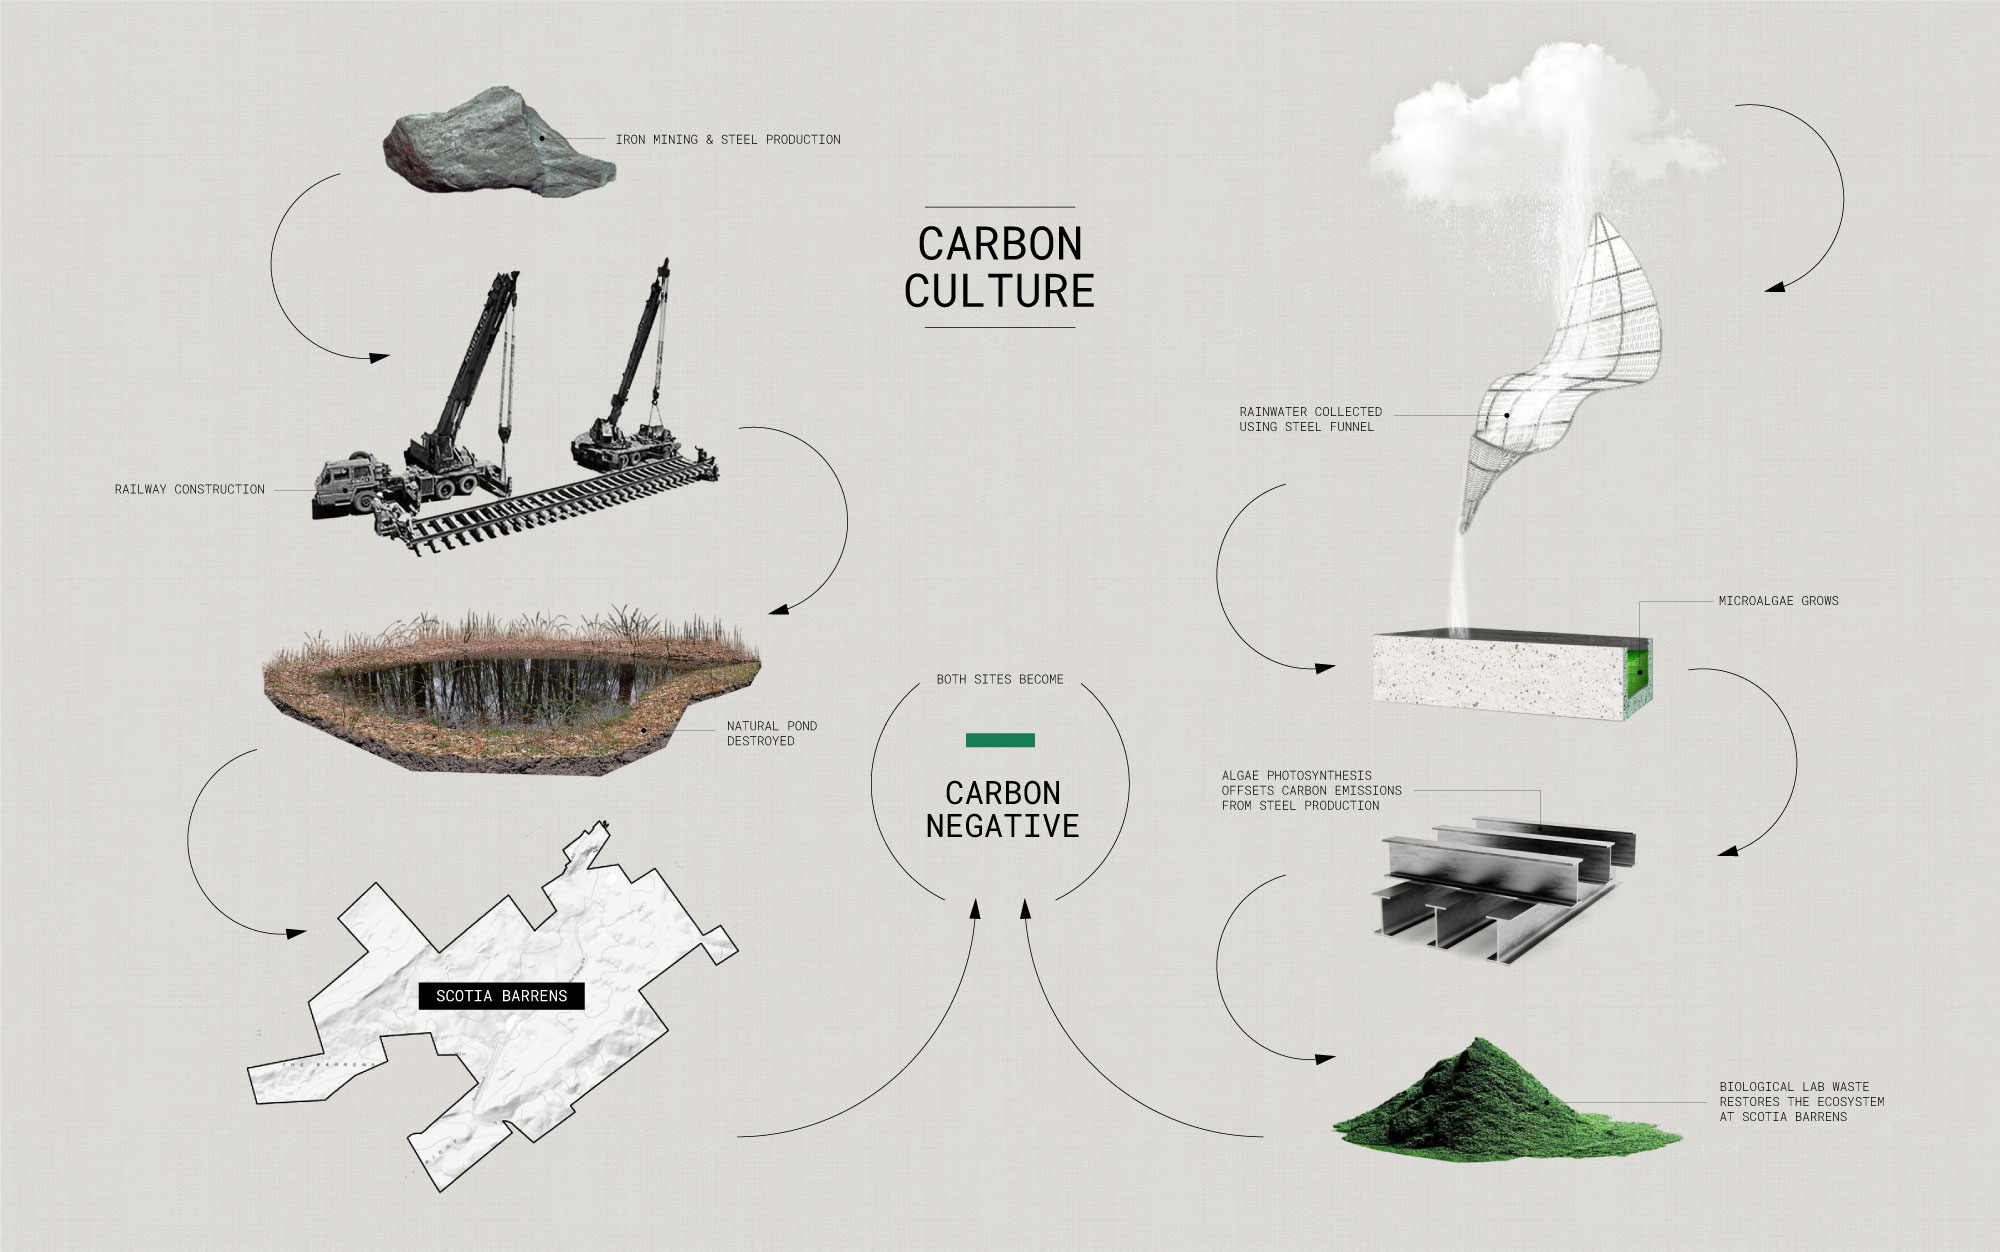 A diagram showing step-by-step process of how the project's two sites become carbon negative